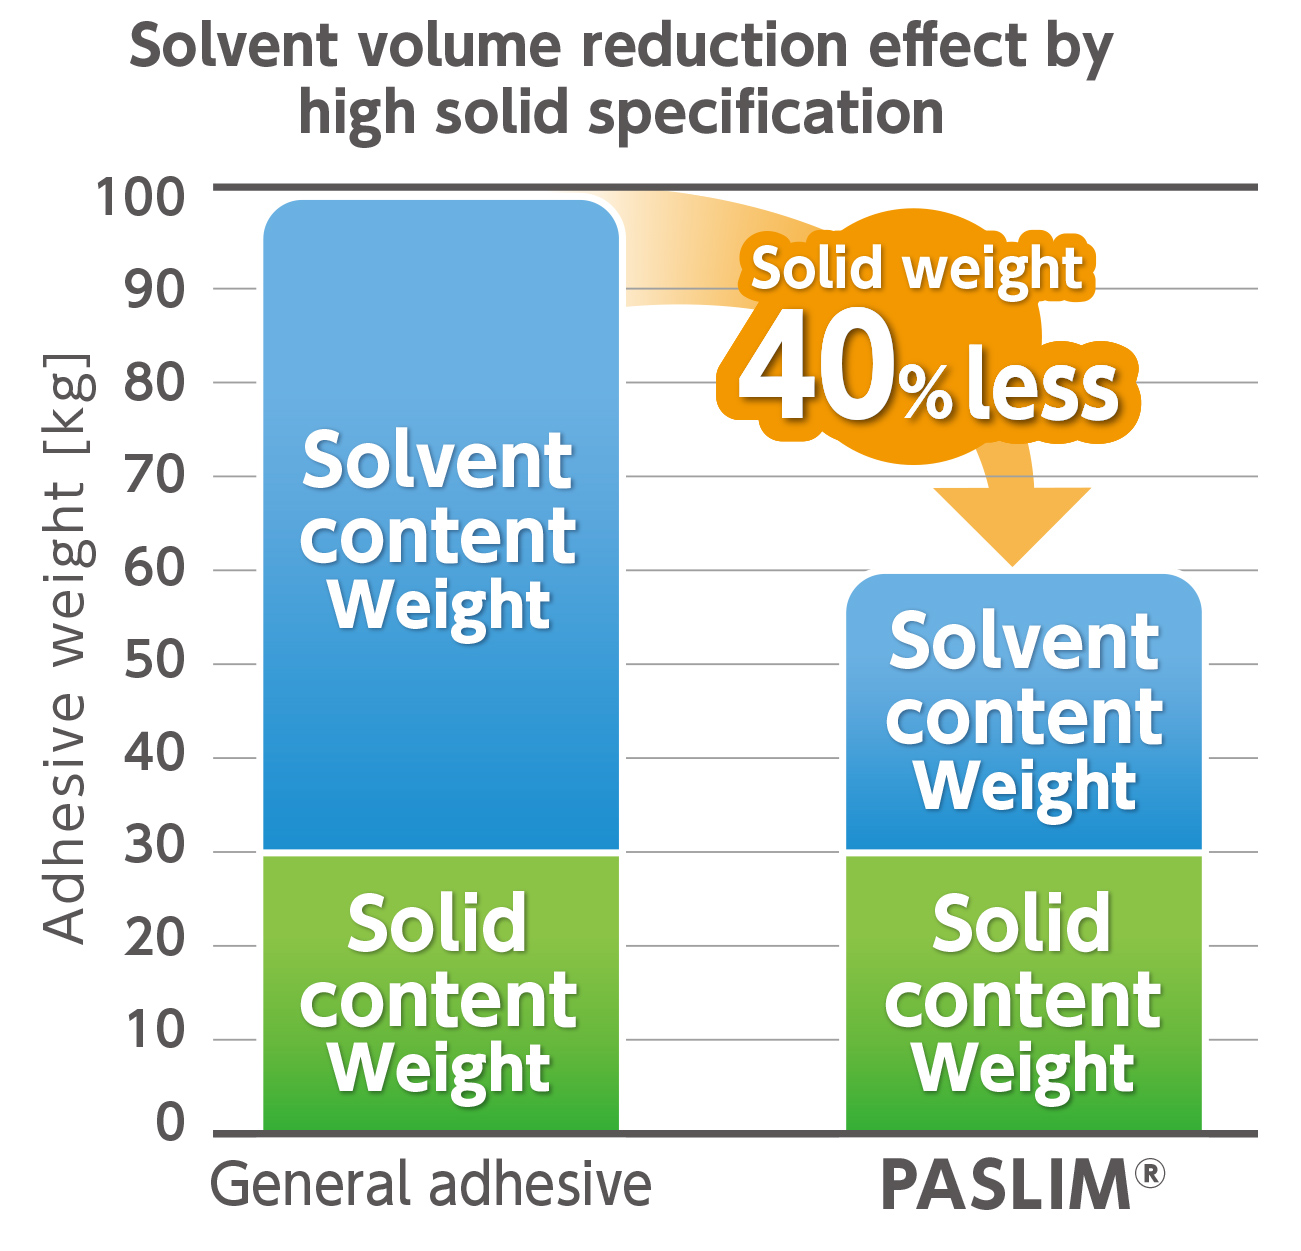 Other expected effects of PASLIM®